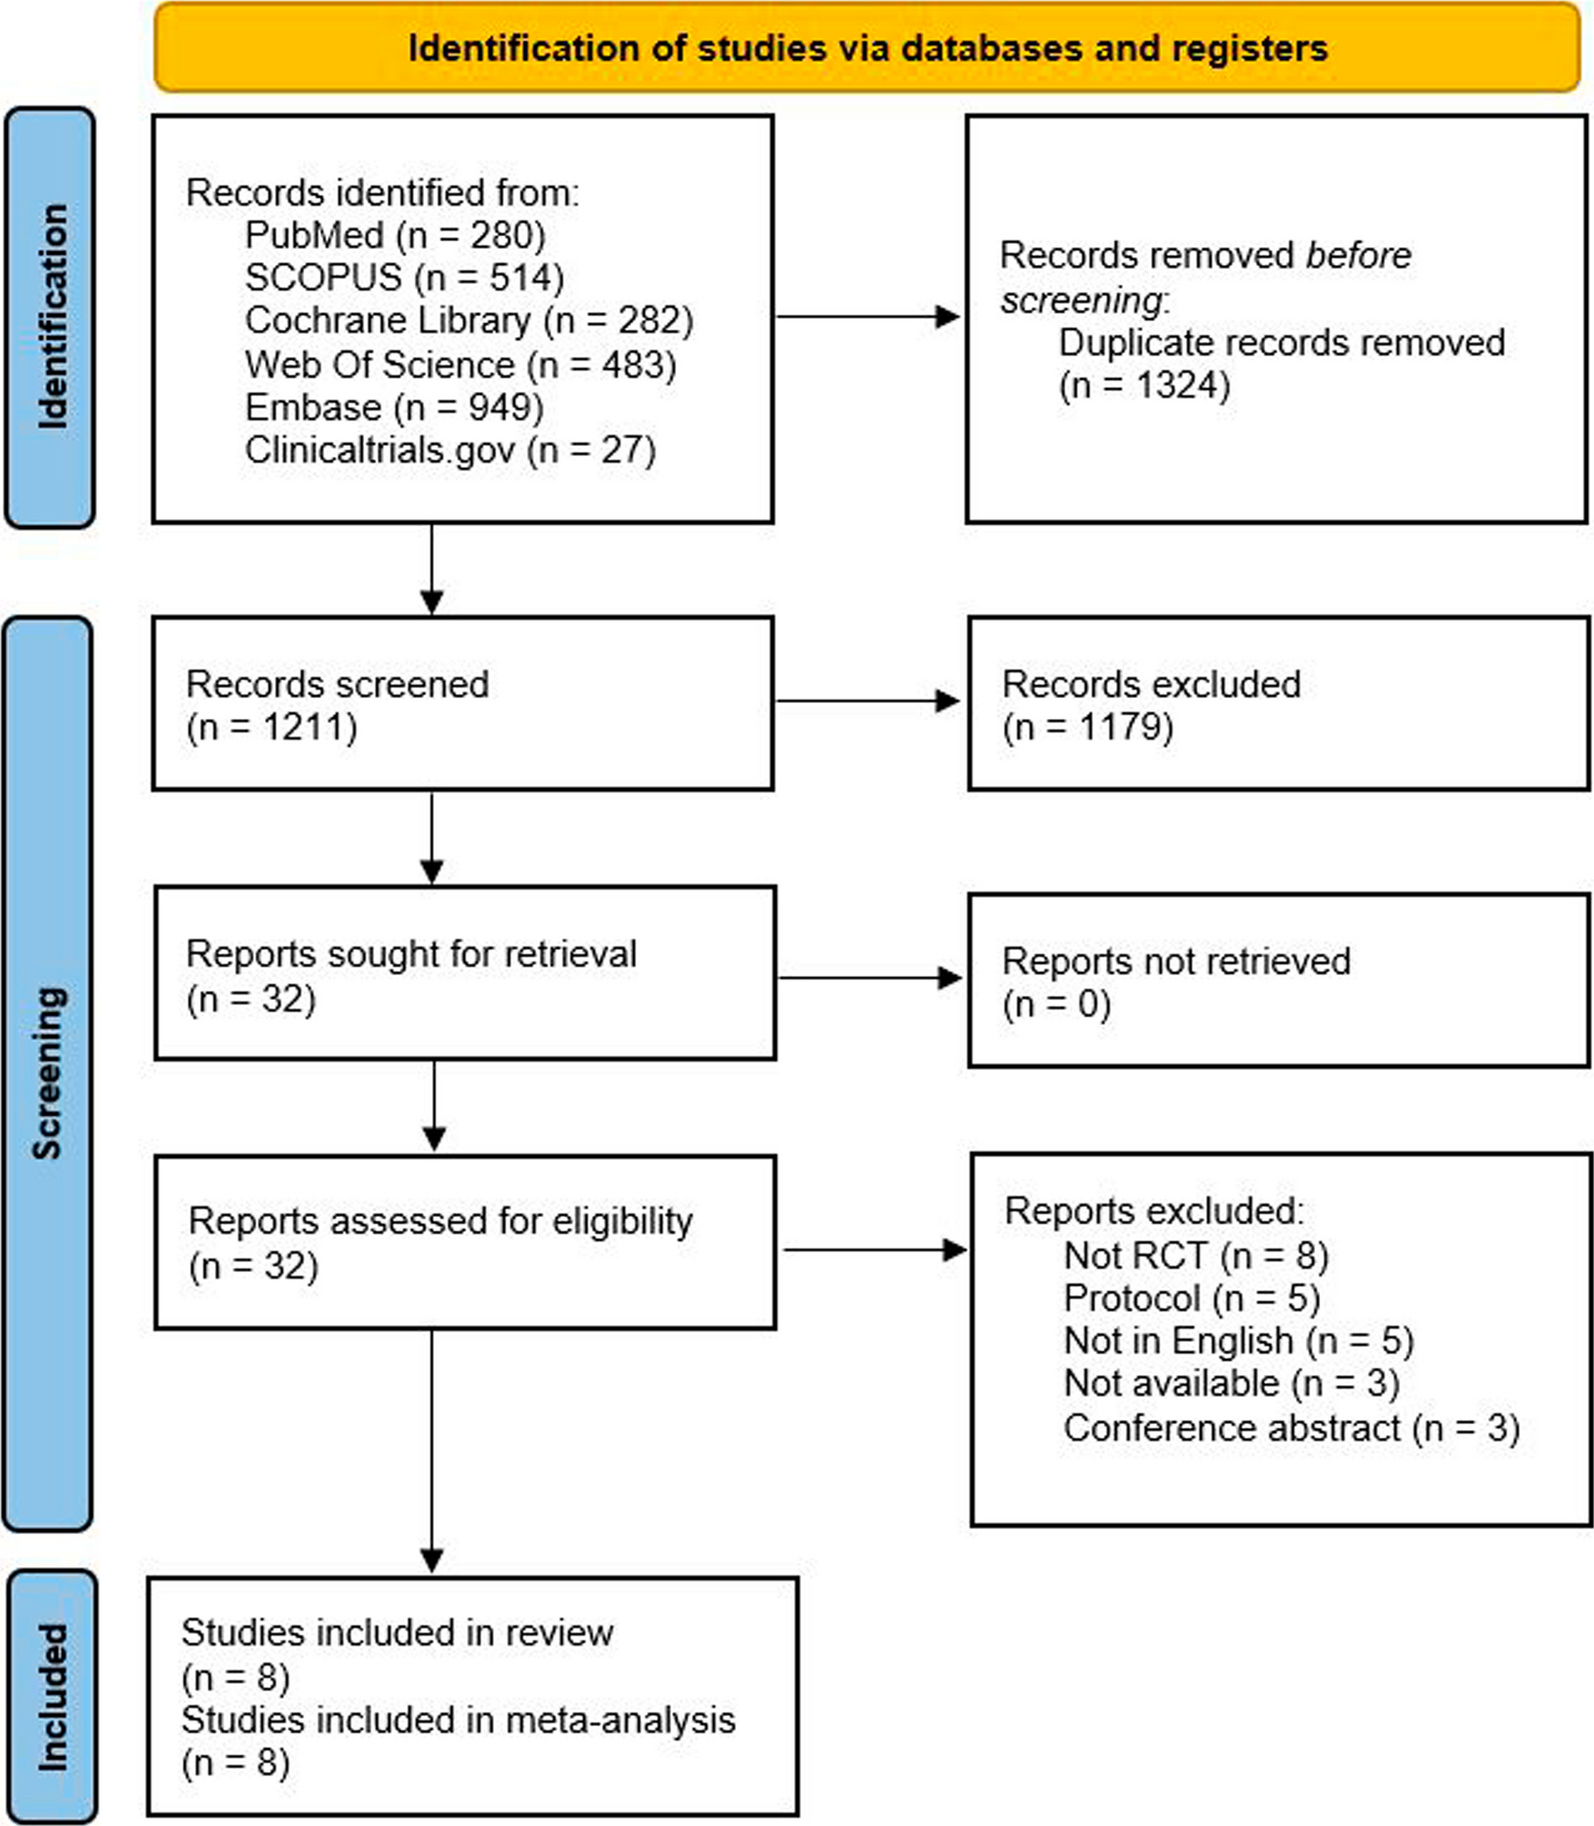 Safety and efficacy of galcanezumab in chronic and episodic migraine patients: a systematic review and meta-analysis of randomized controlled trials